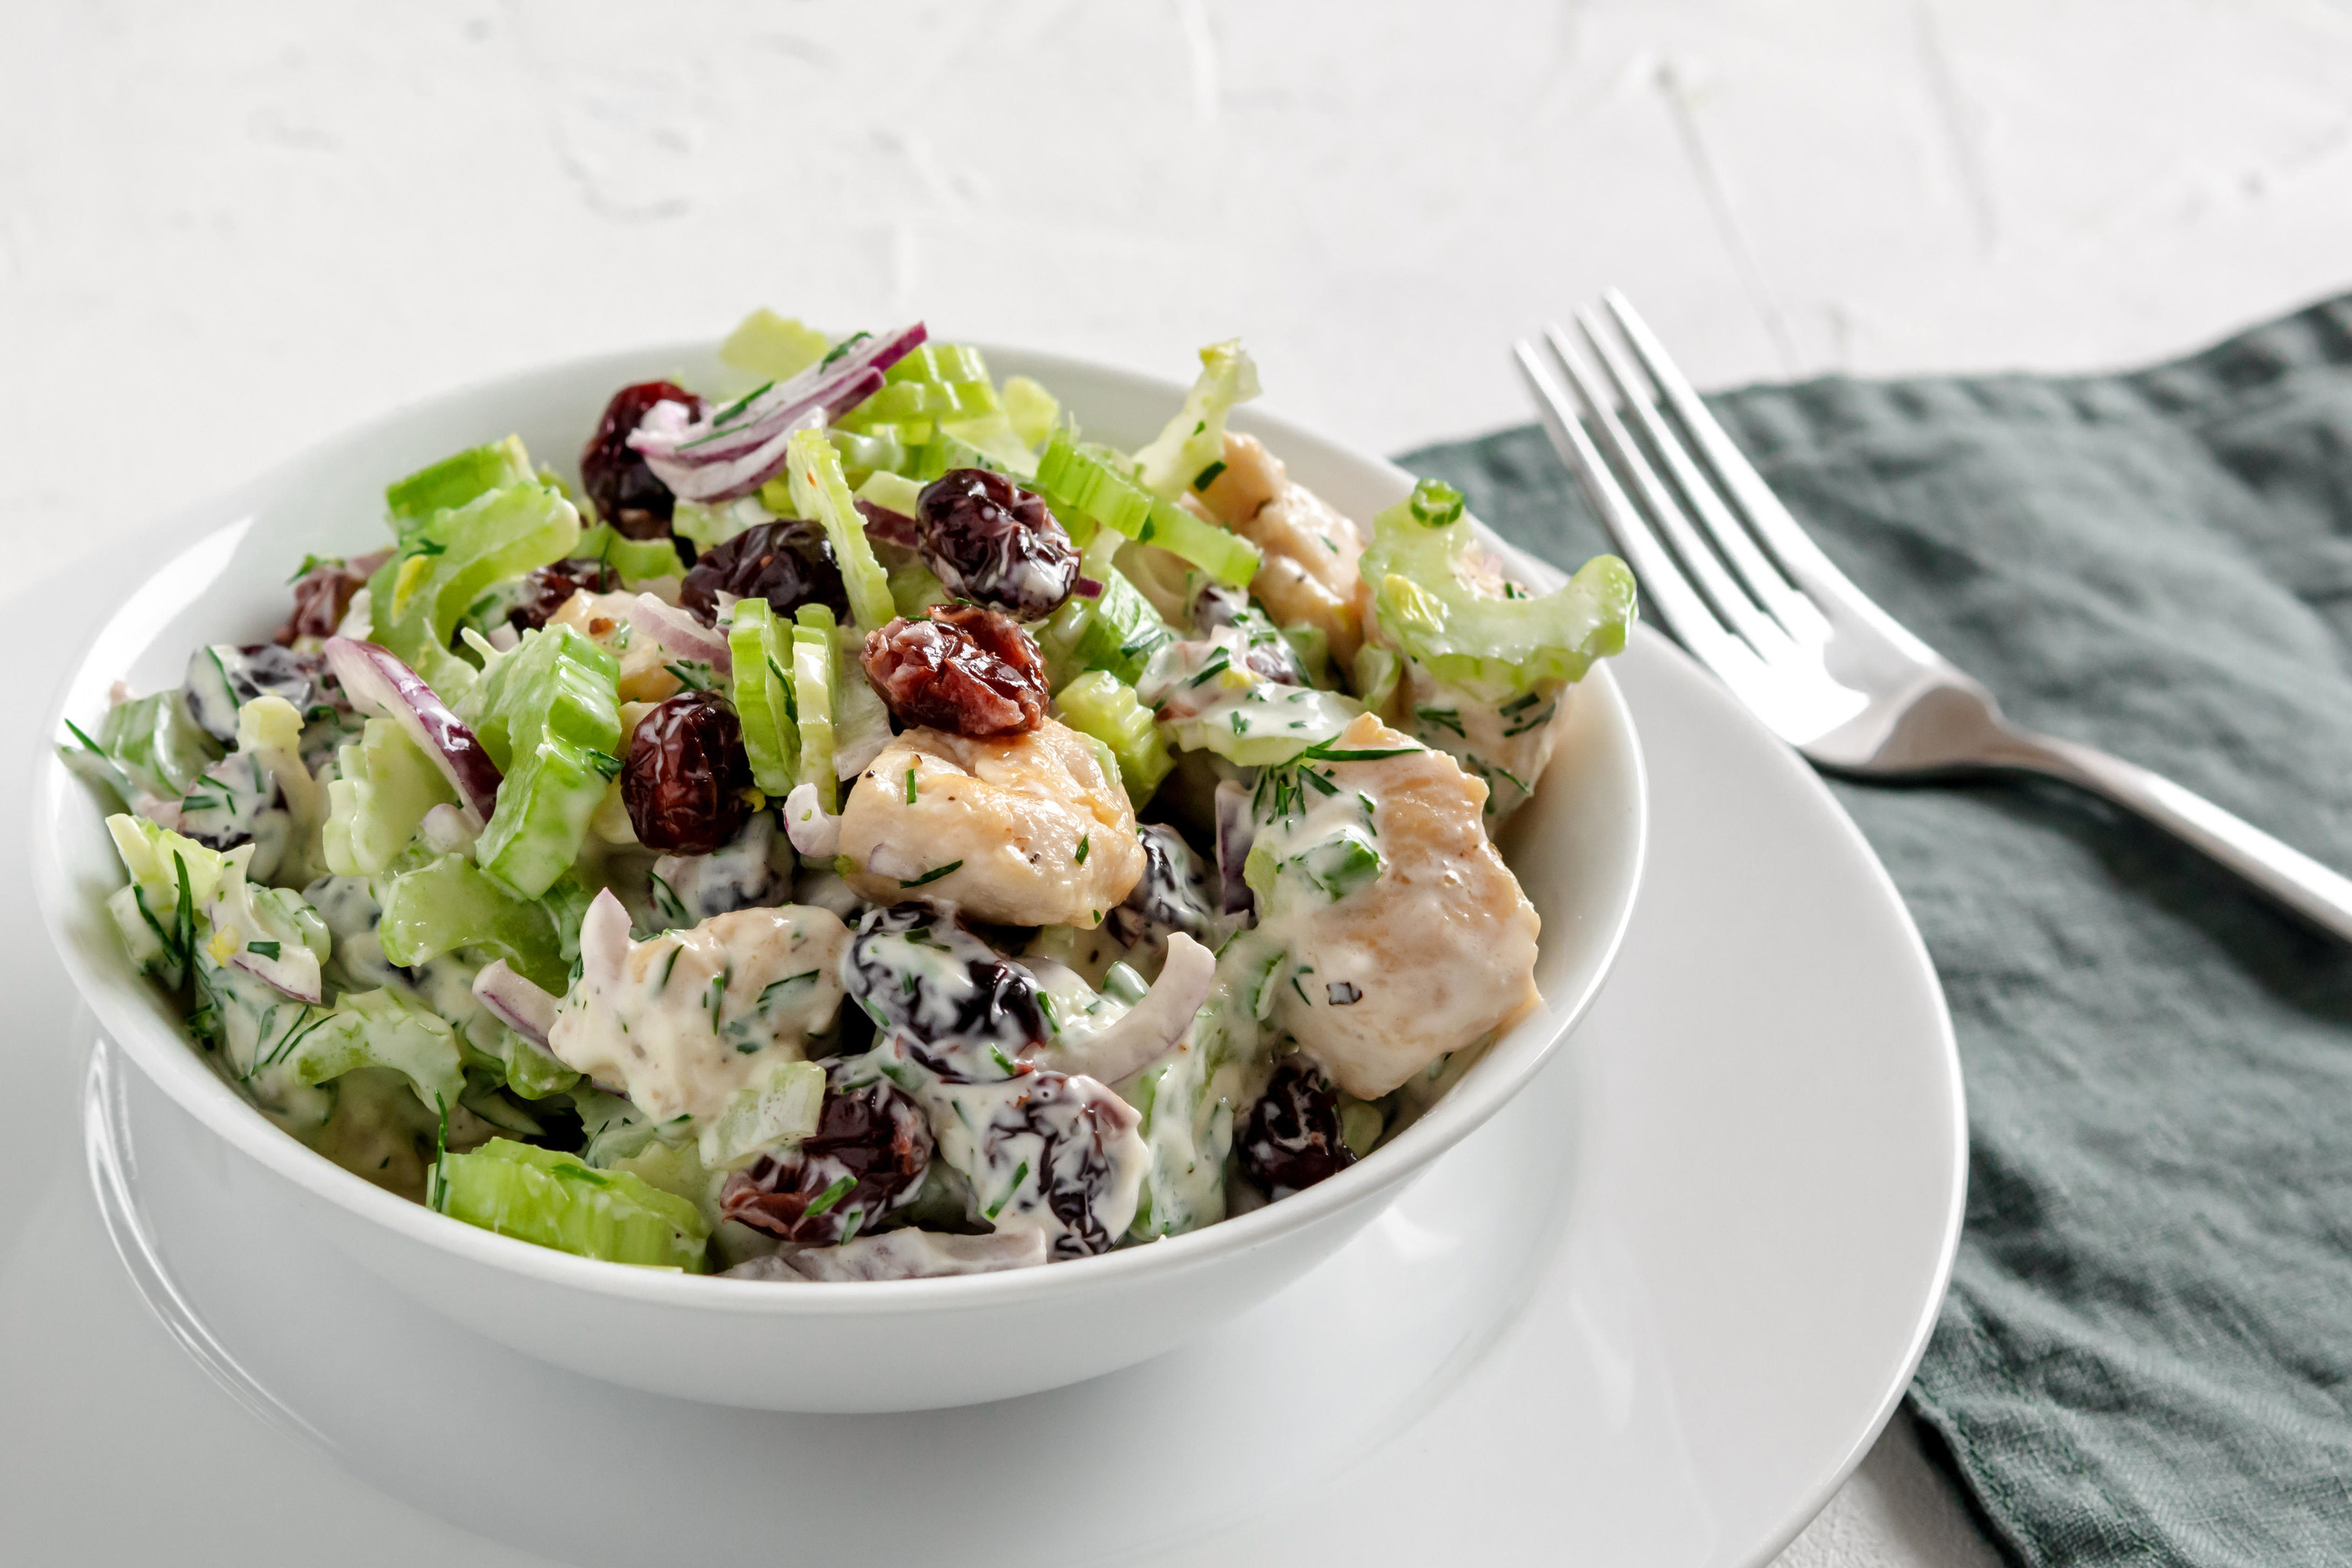 Salad with celery, chicken, cranberry, red onion, dill and yogurt